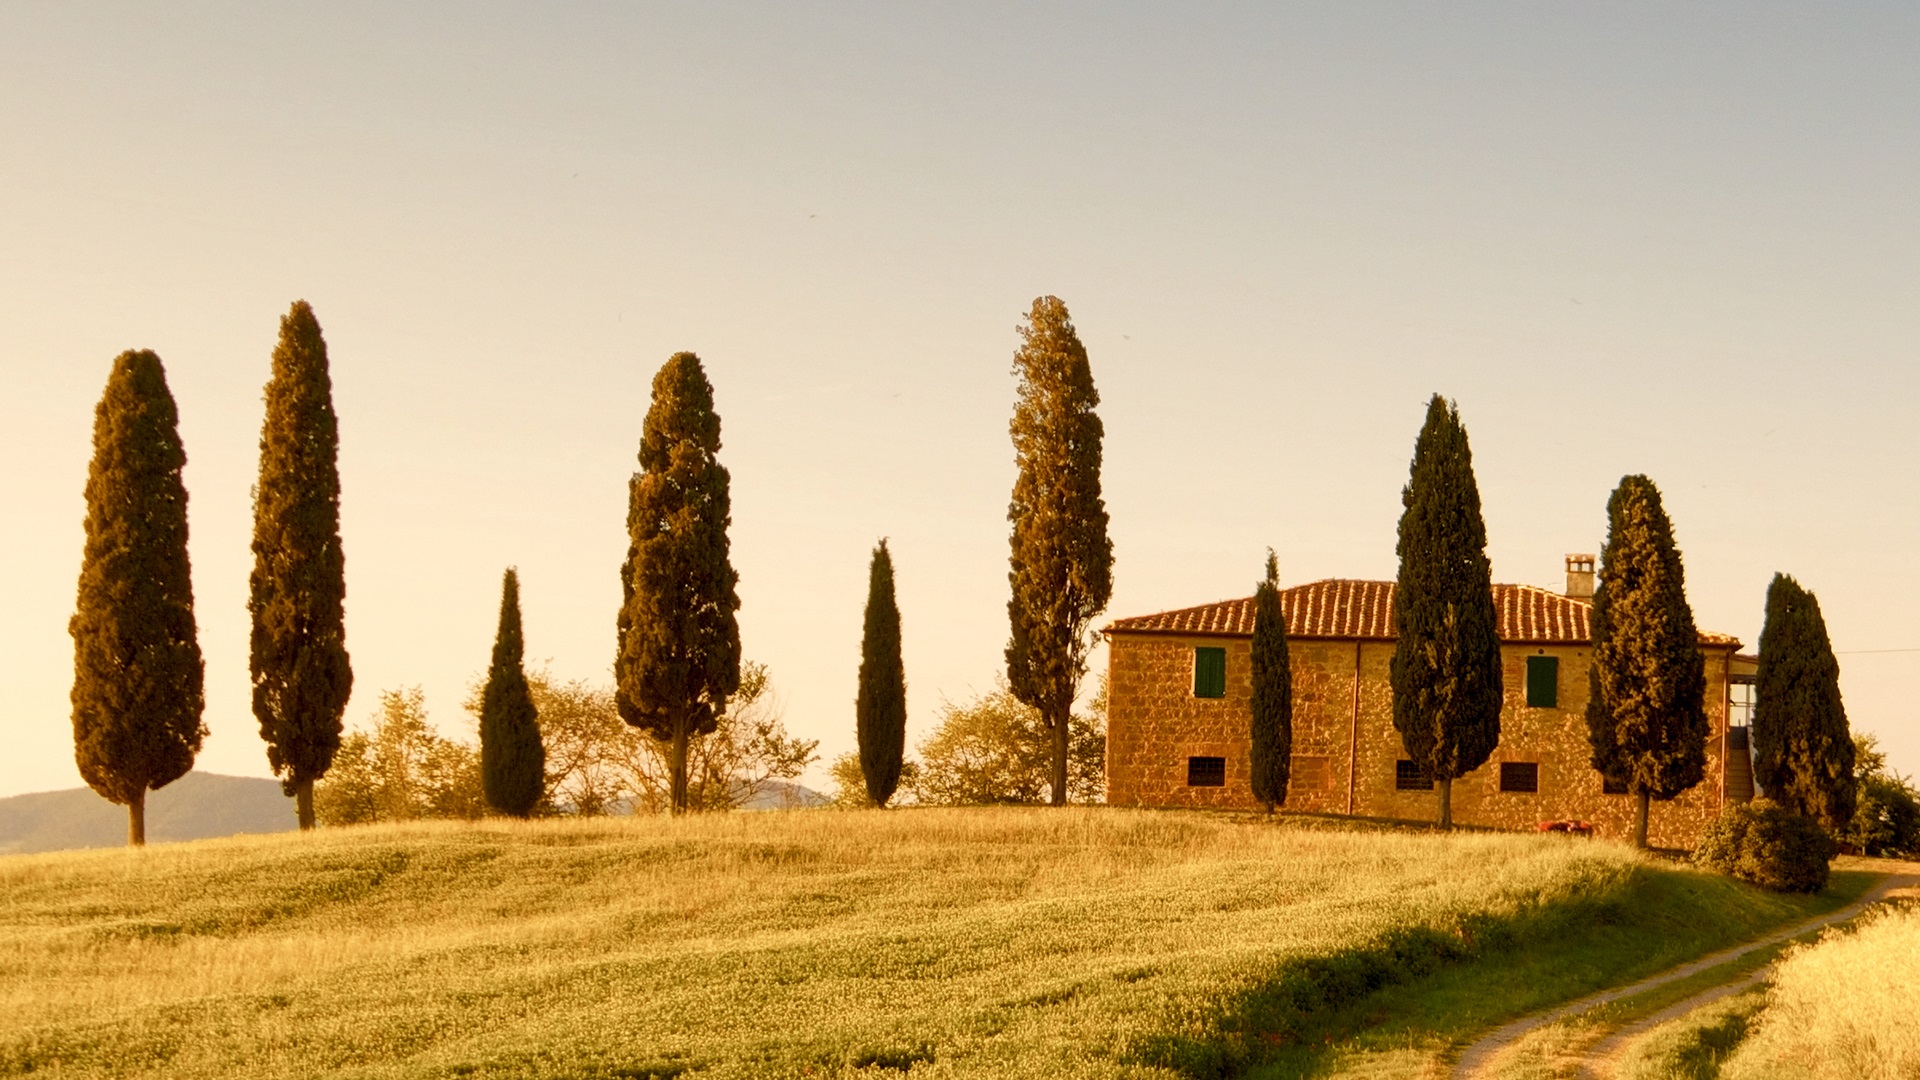 Explore the rustic hilltop town-Pienza engraved in the Italian cypress trees